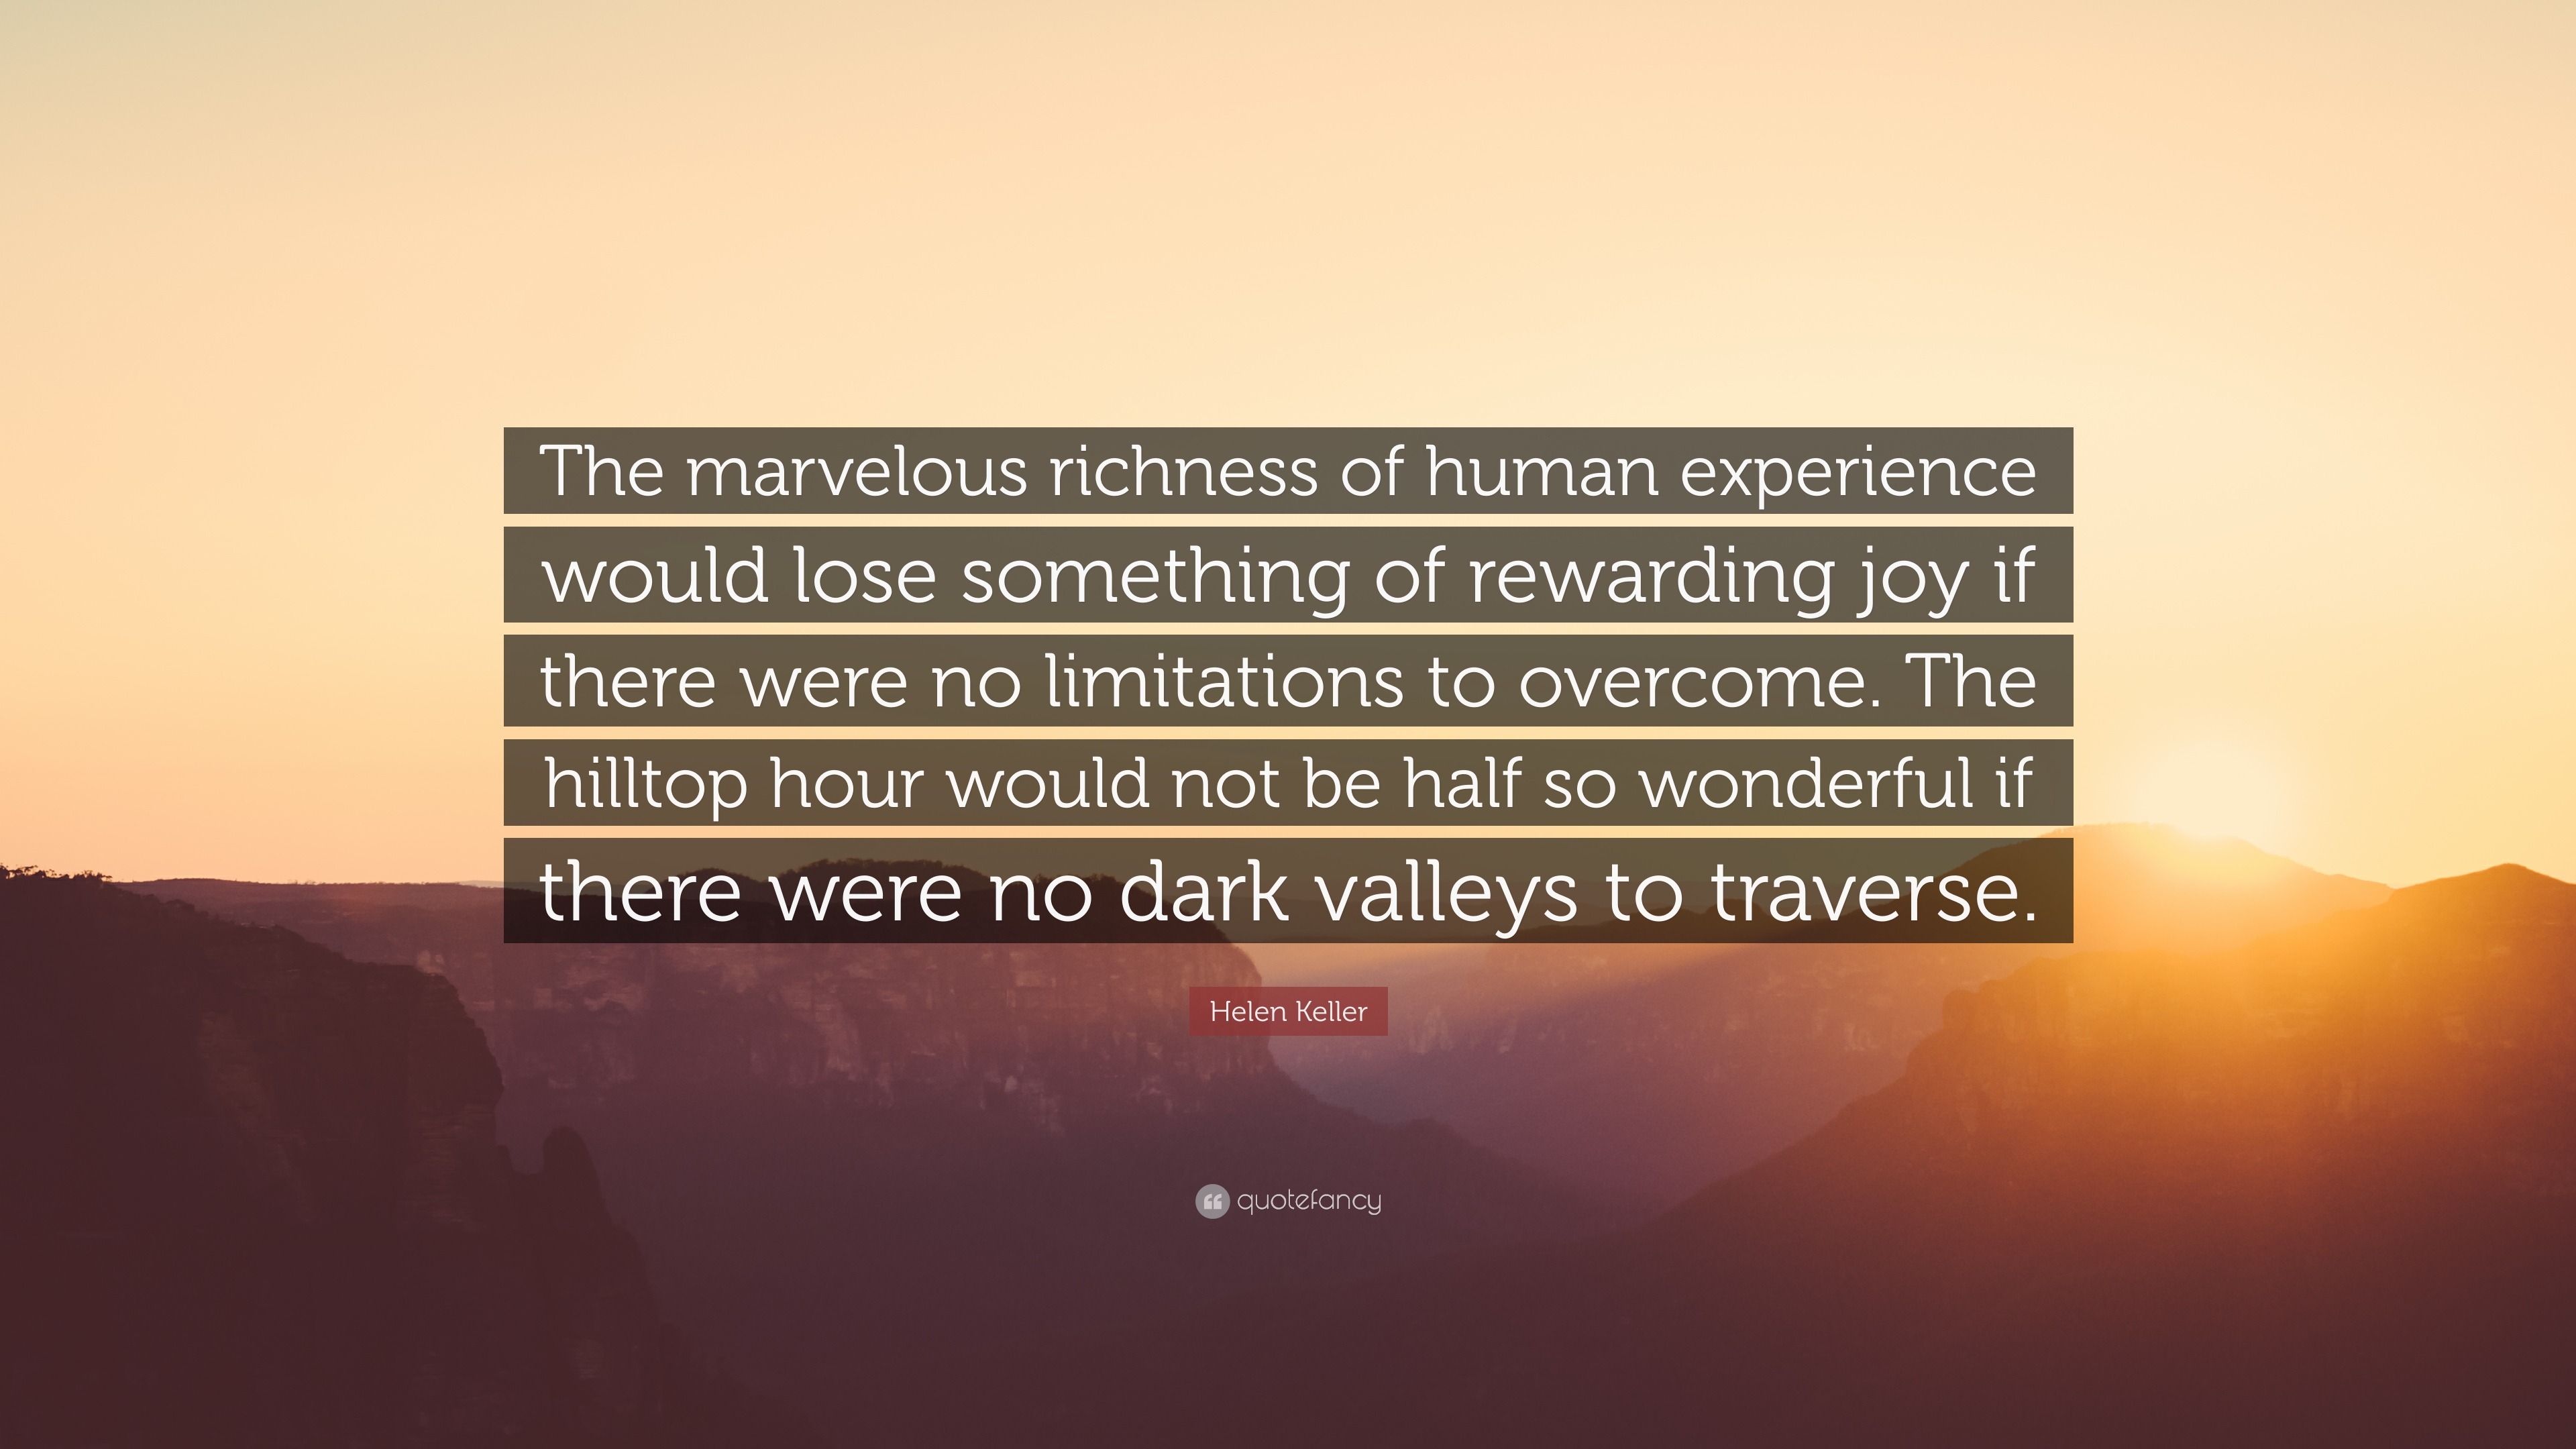 Helen Keller Quote: “The marvelous richness of human experience would ...